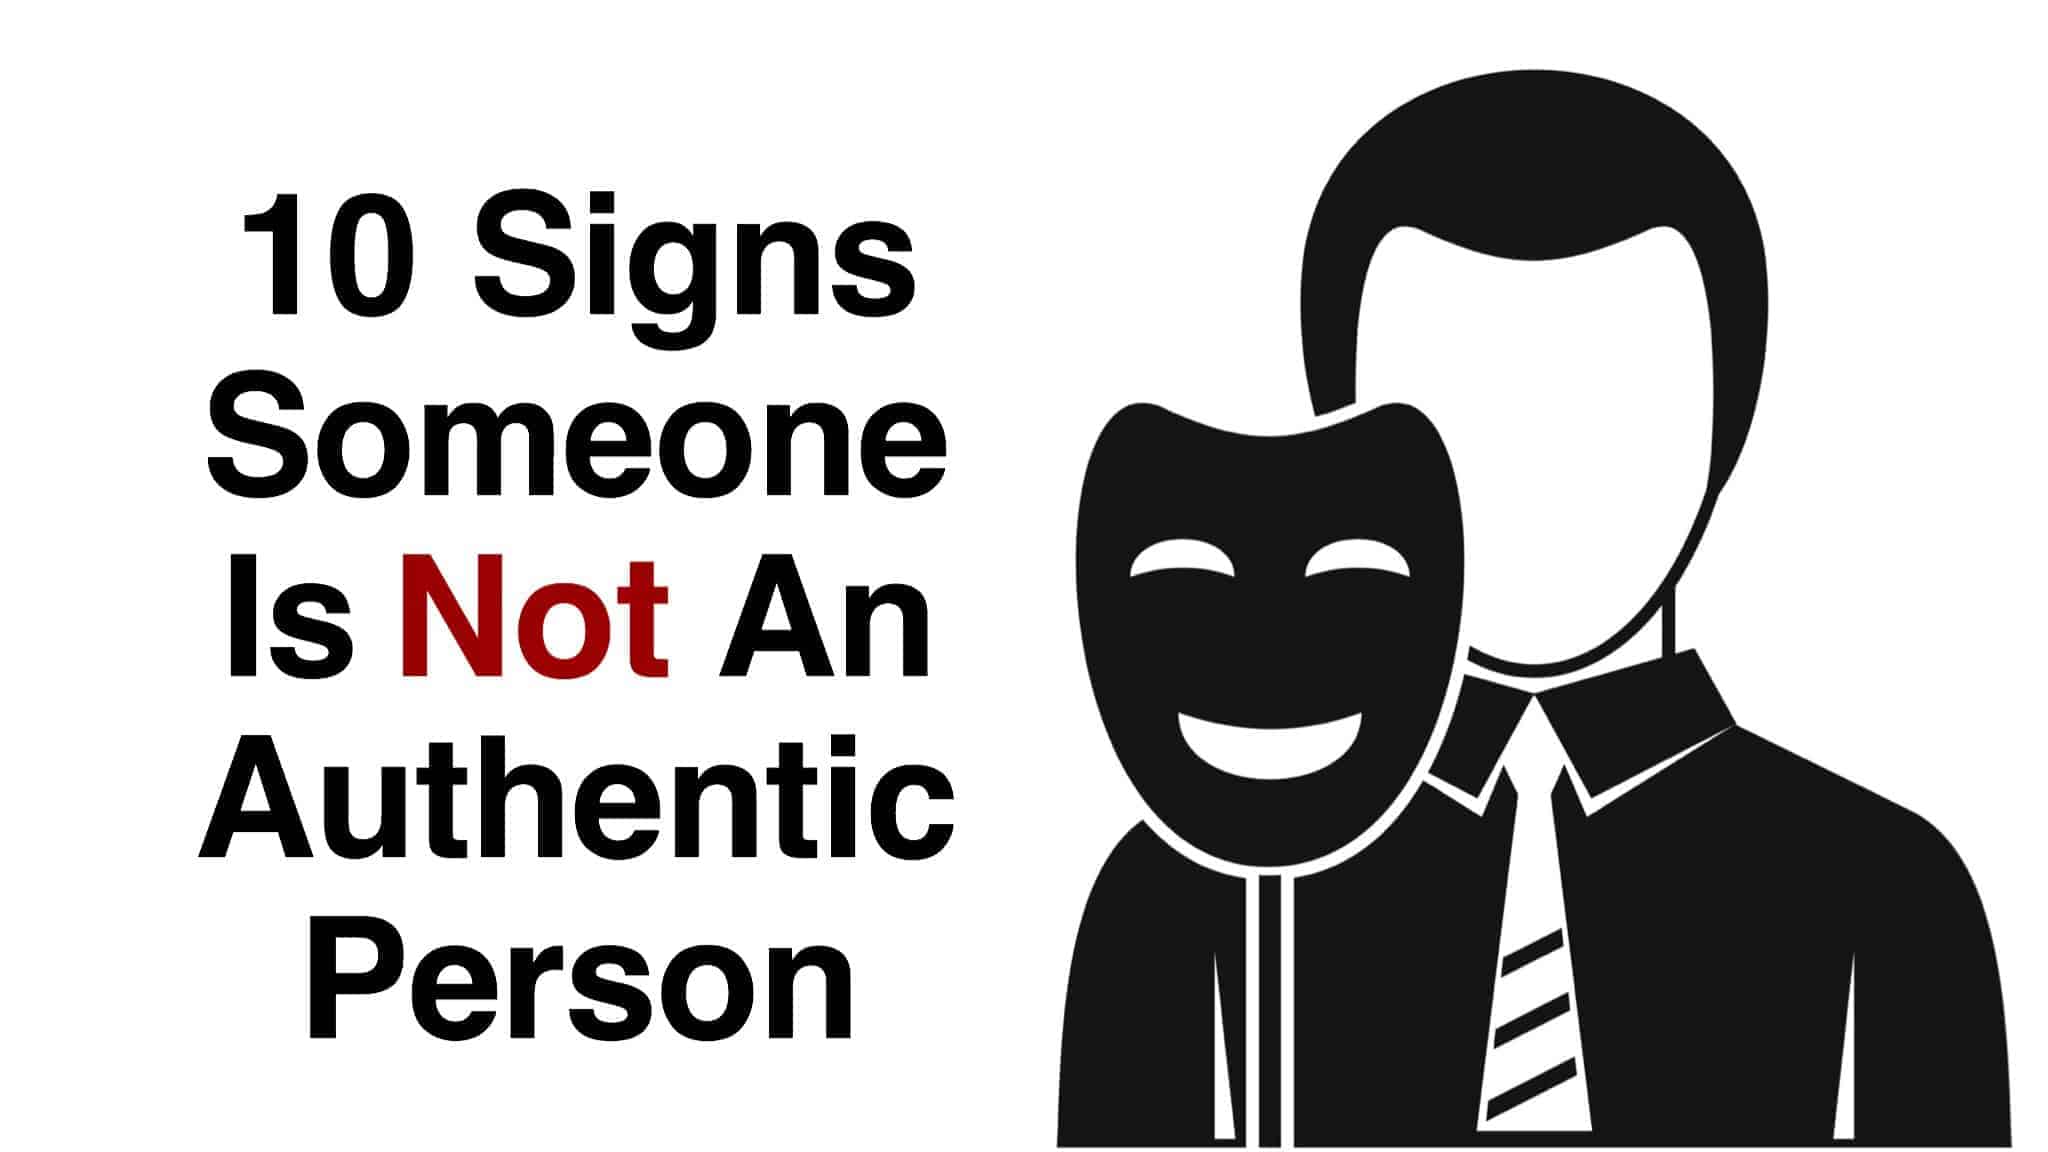 10 Signs Someone is Not An Authentic Person